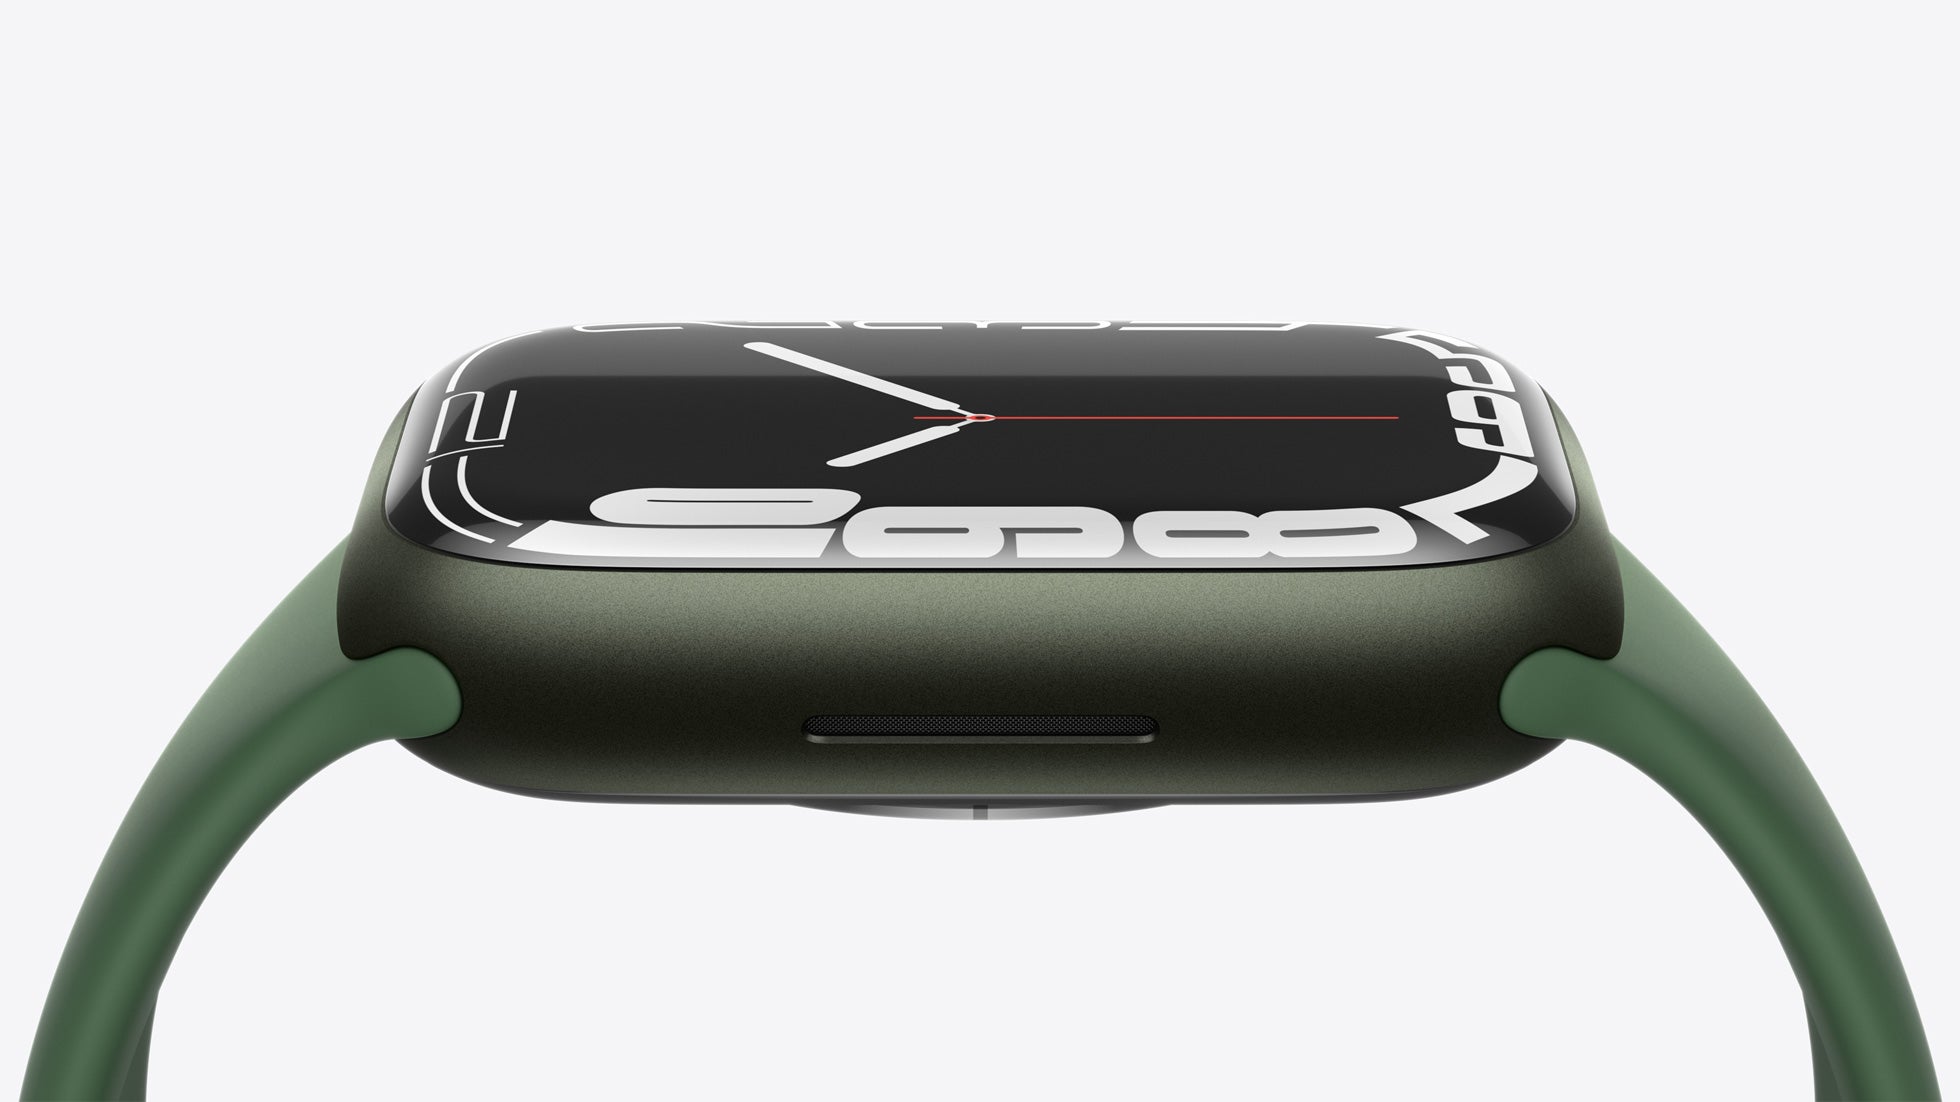 The Contour watch face demonstrates how thin the bezels on the Series 7 new display are. (Image: Apple)